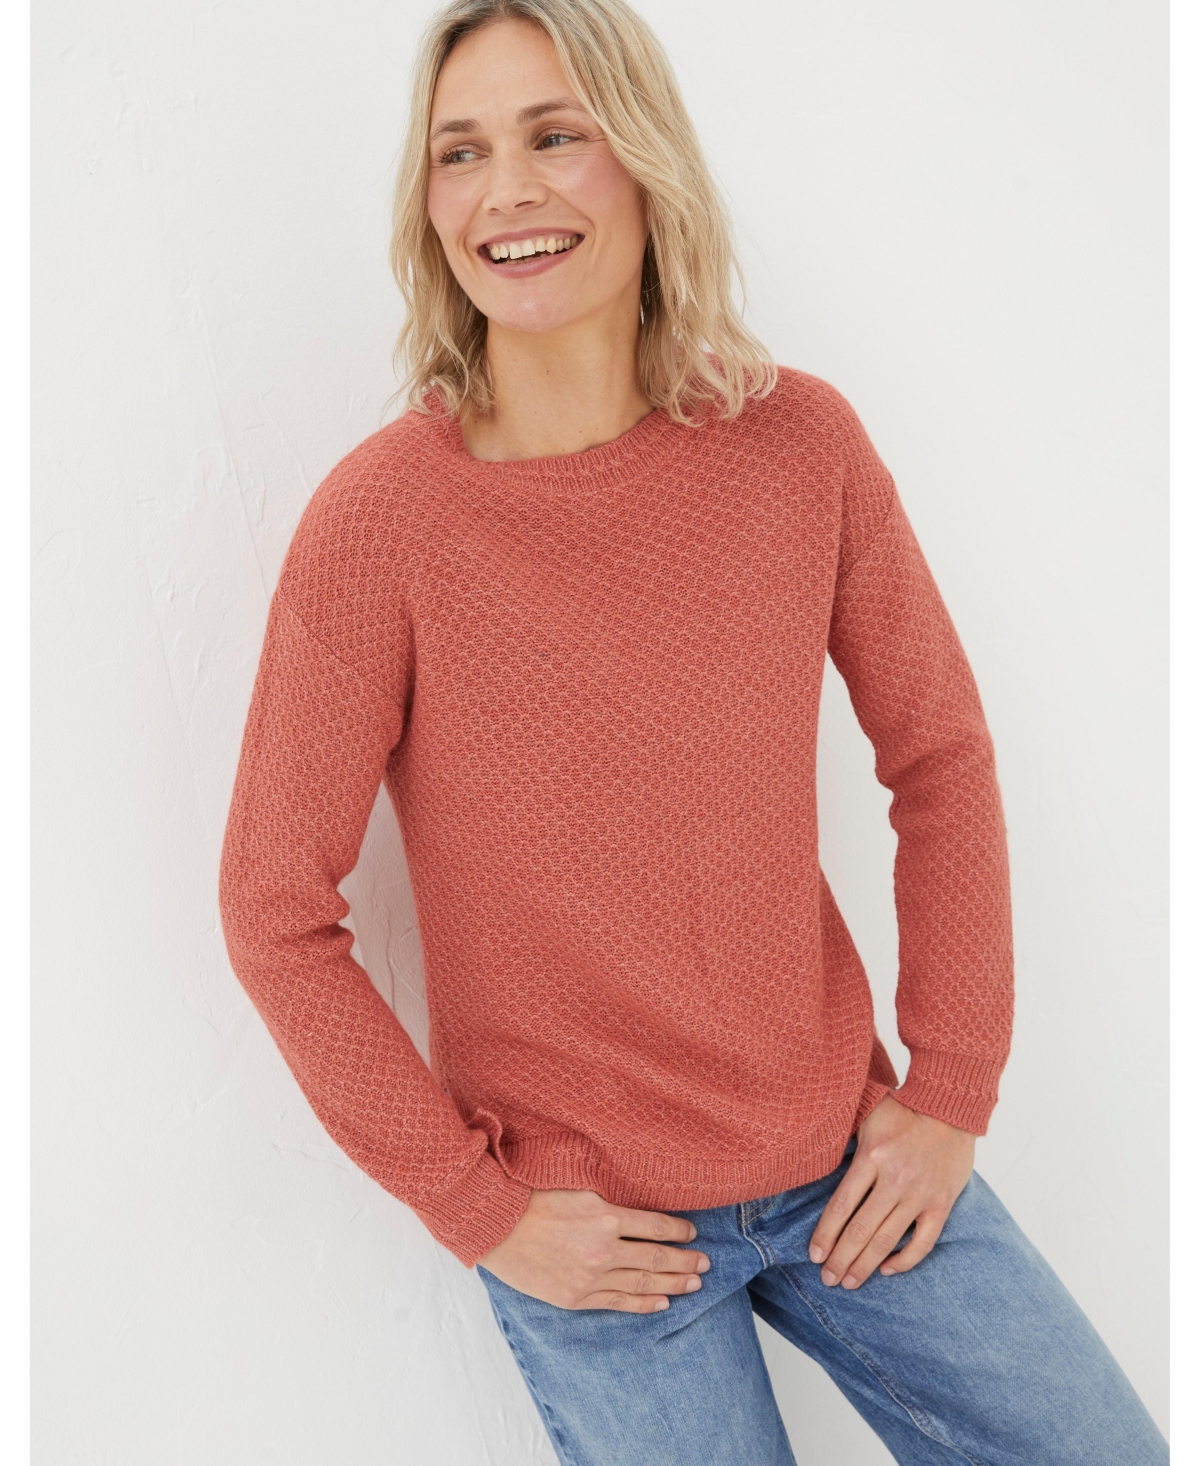 Women's Ellie Crew Sweater - Washed red